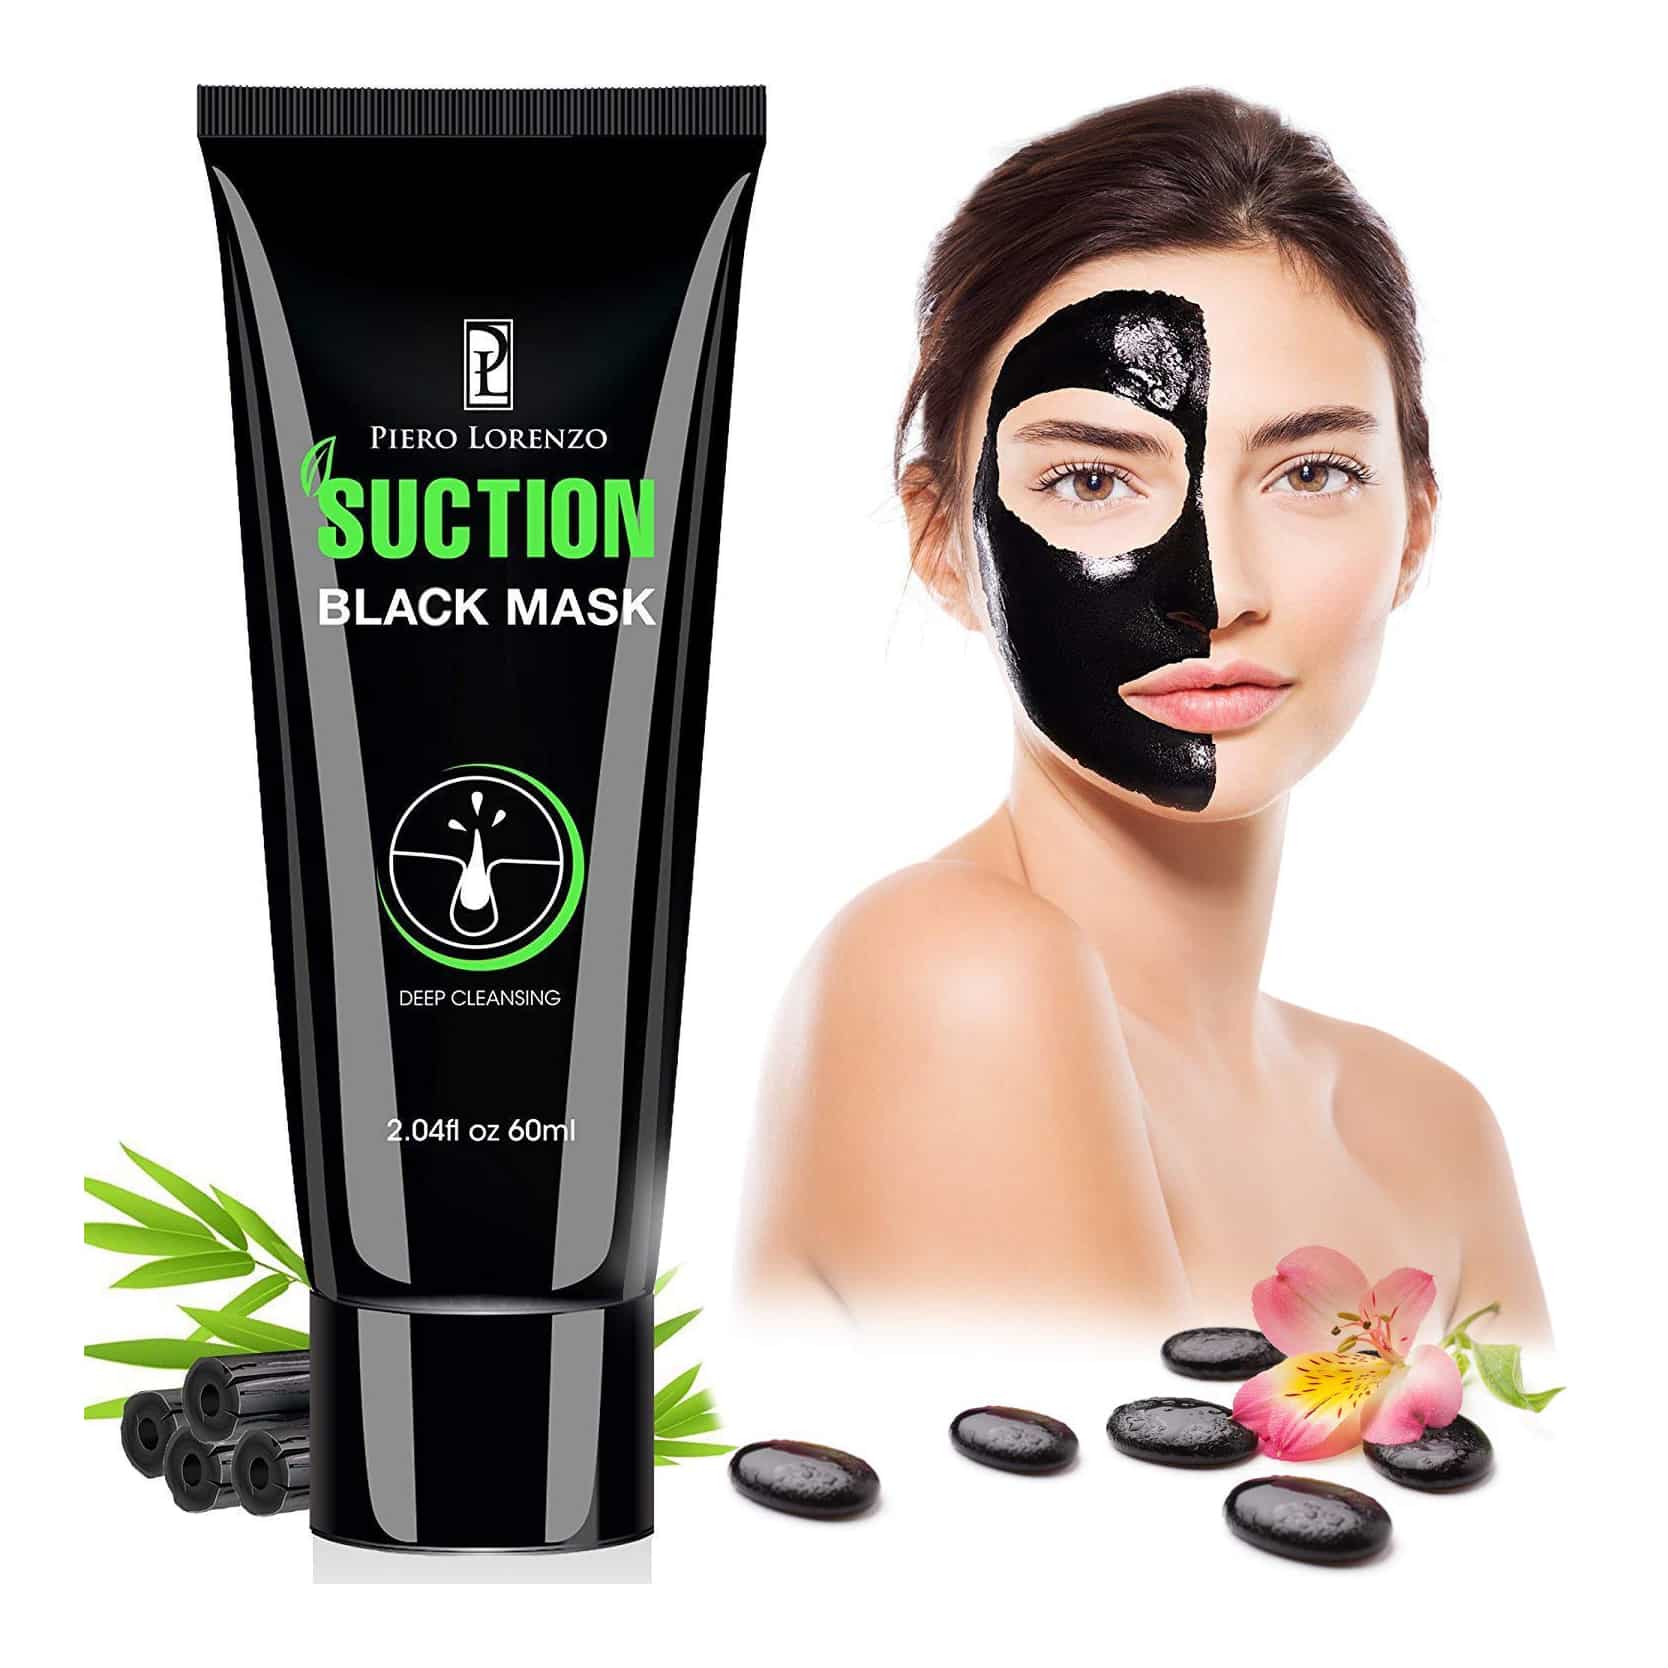 Top 10 Best Blackhead Remover Masks in 2022 Reviews | Buyer's Guide